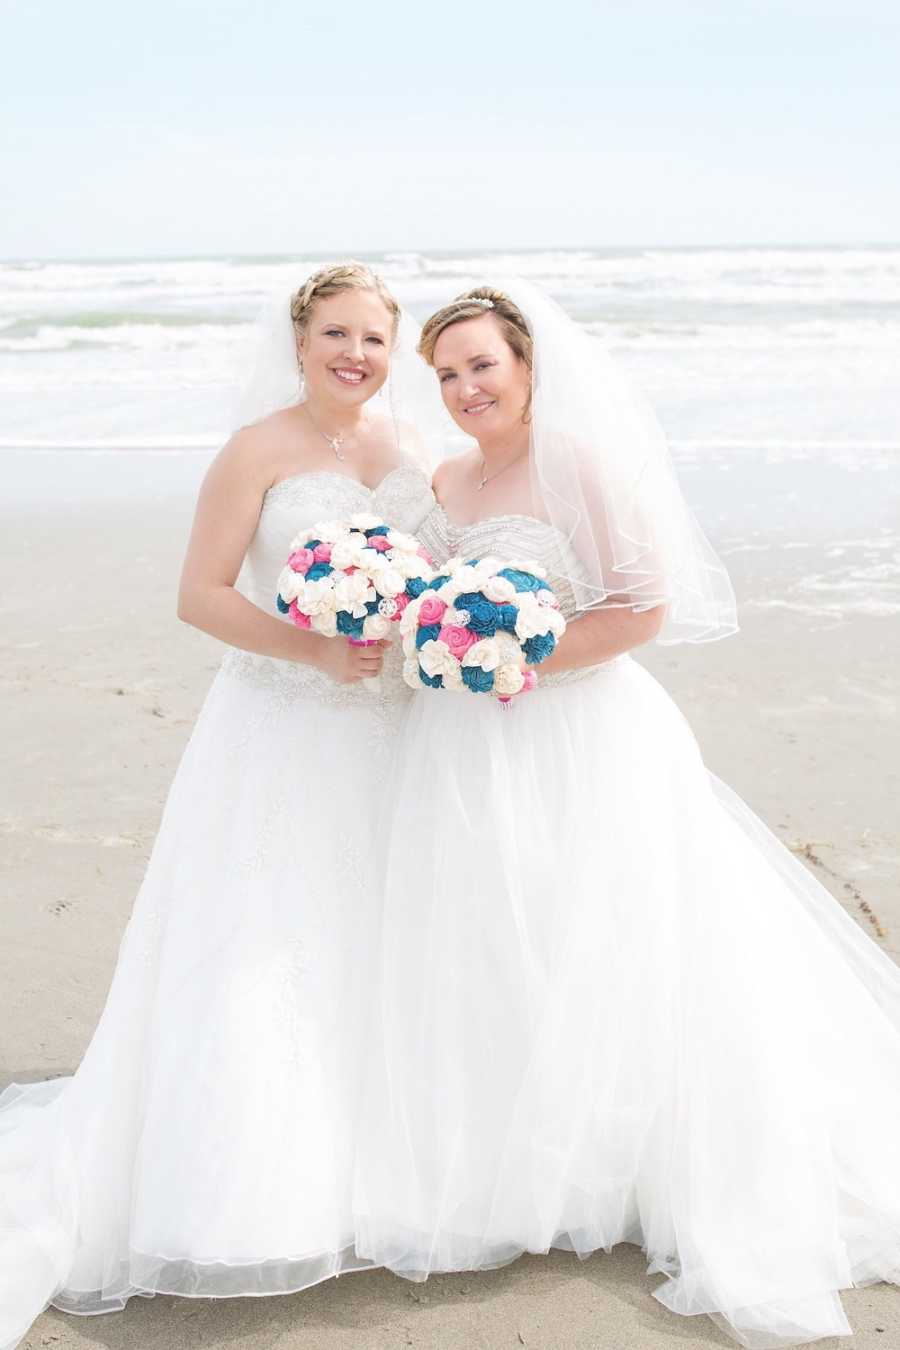 Lesbian brides stand on beach holding bouquet of colorful flowers